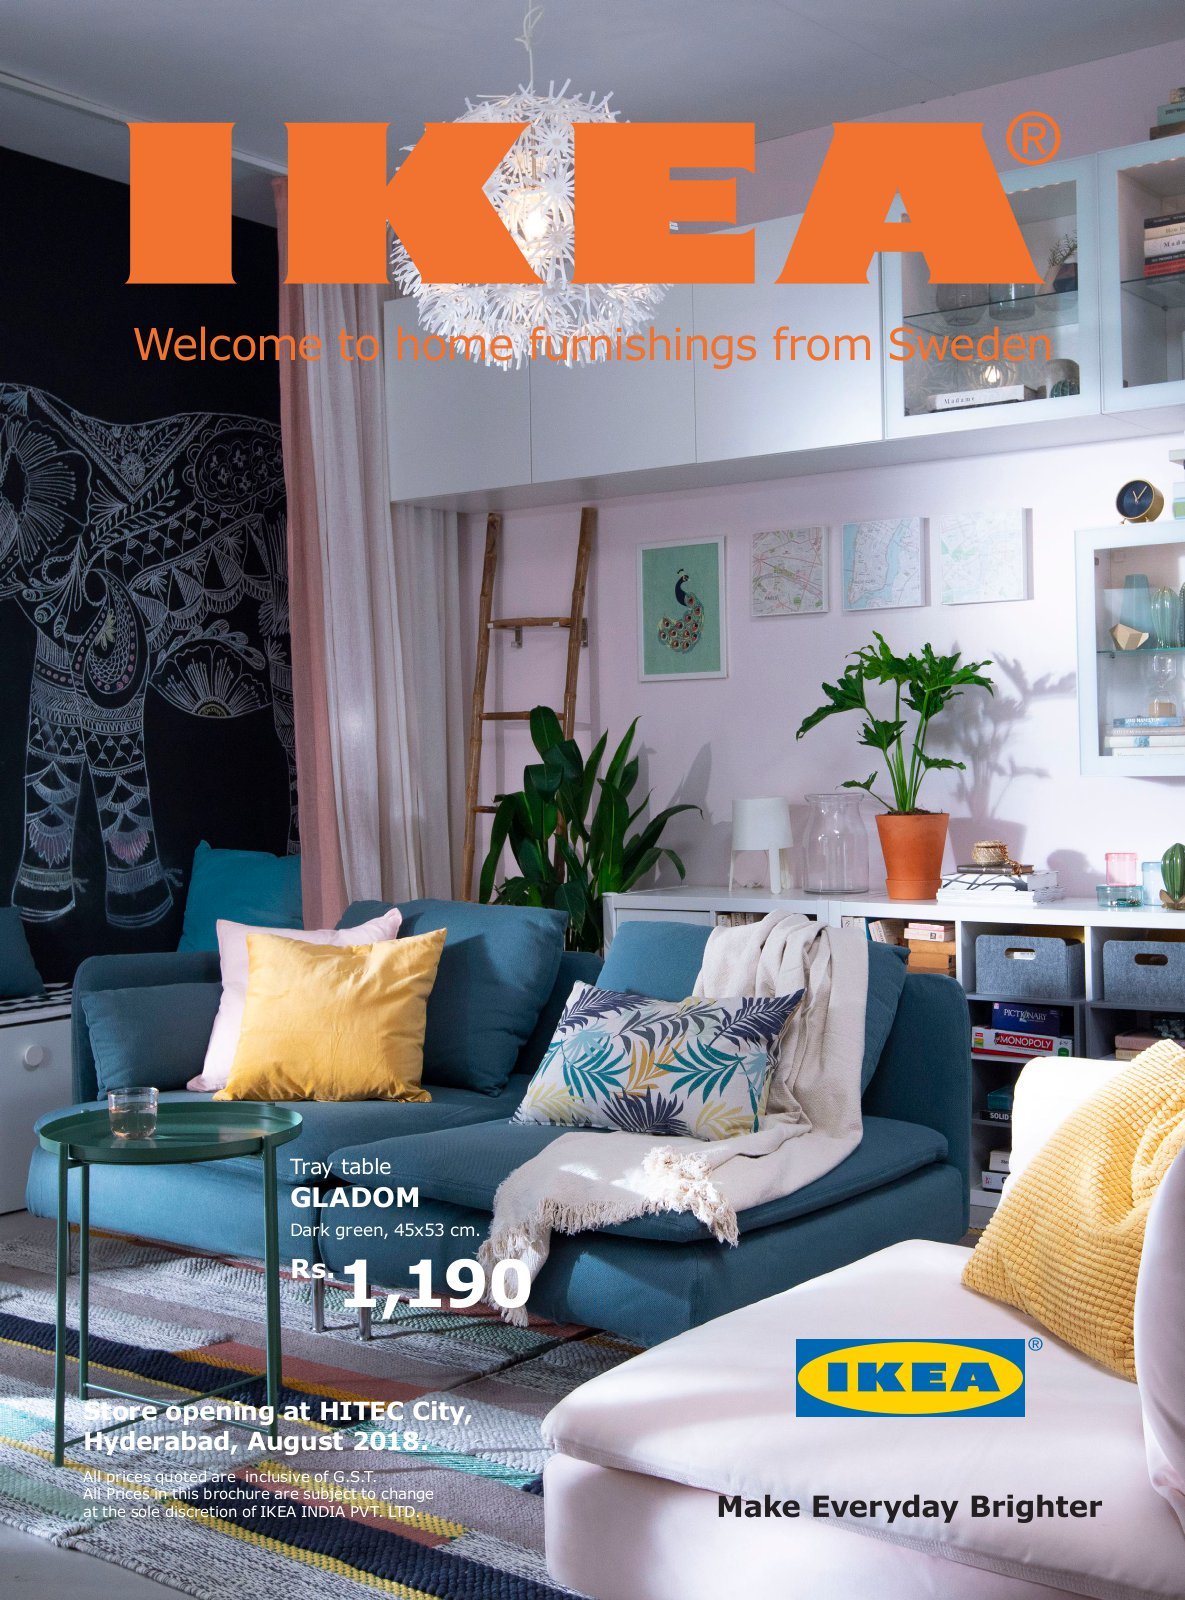 IKEA’s first India store opening at Hyderabad